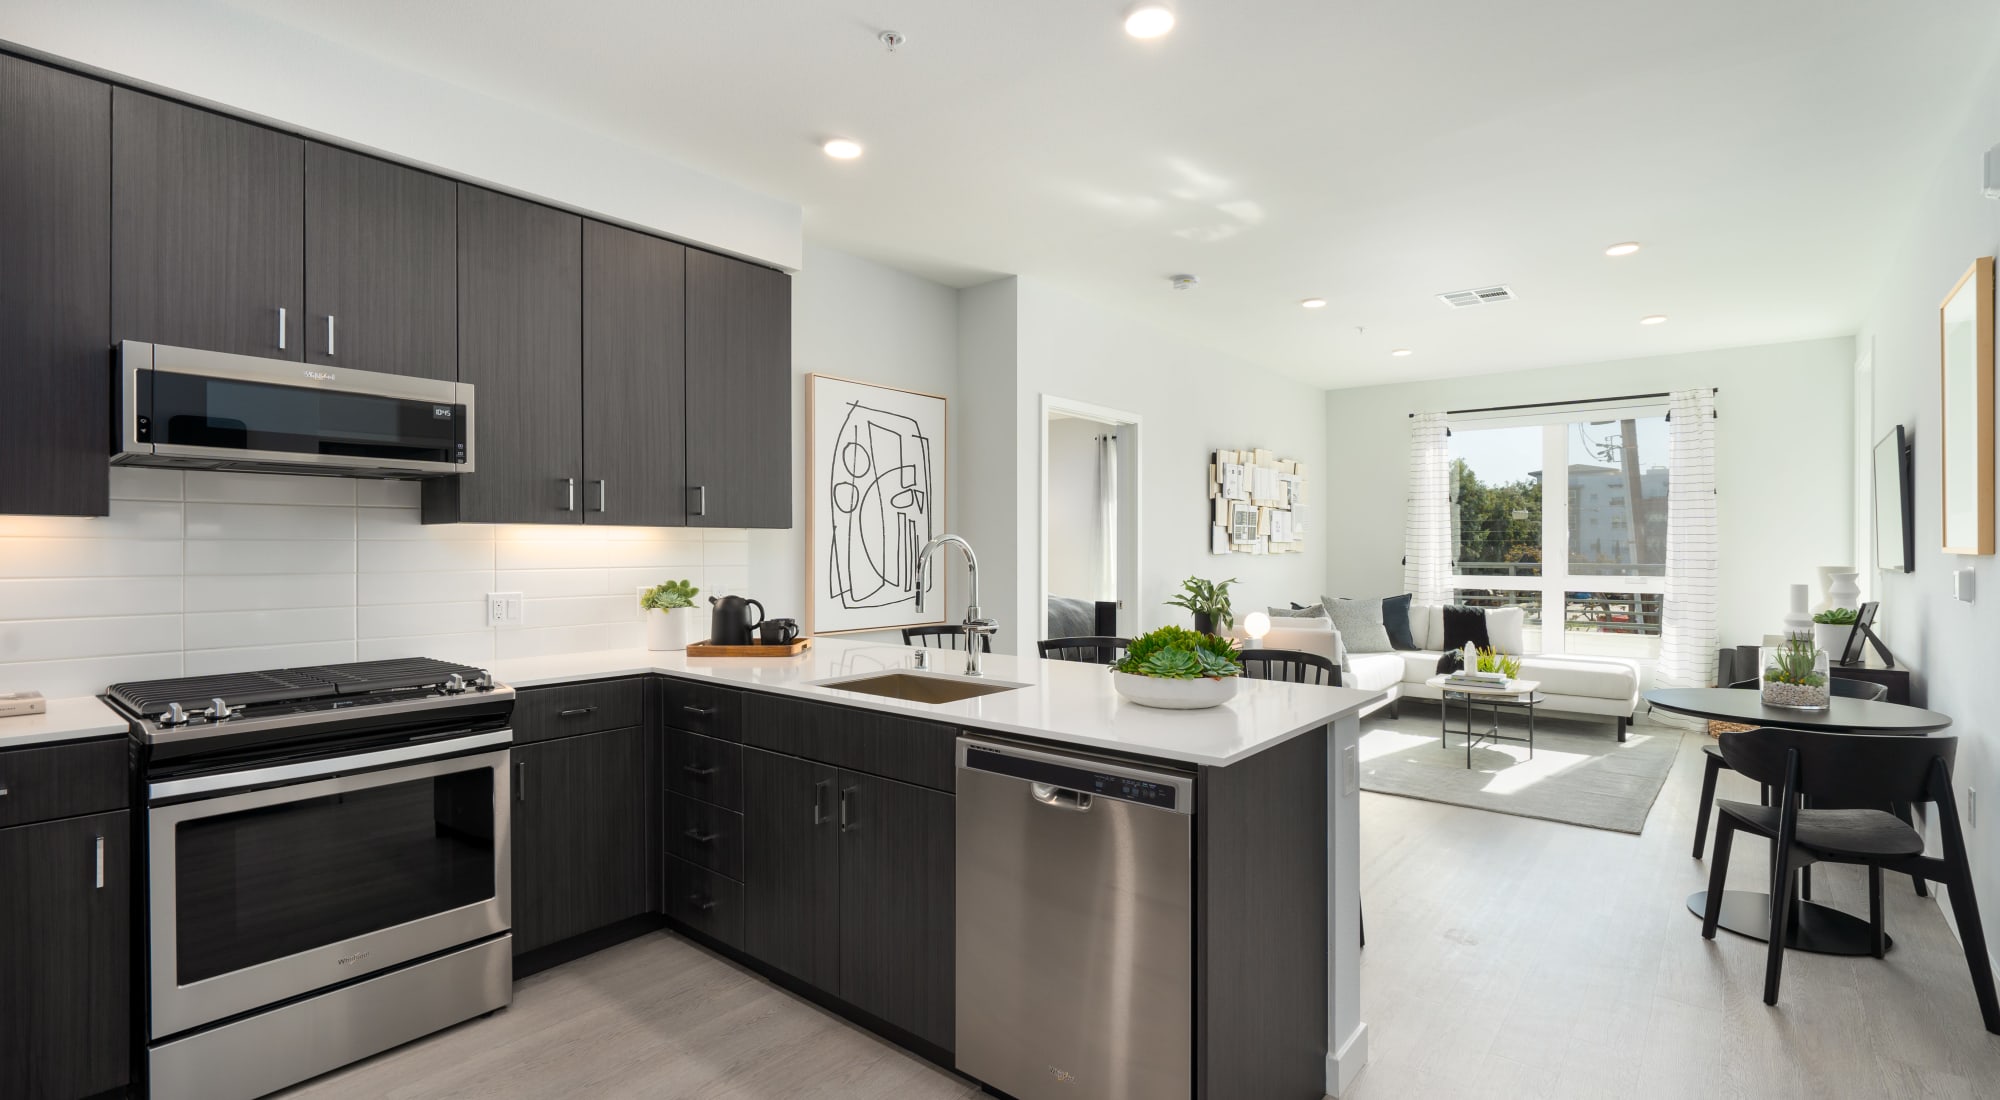 Floor plans at MV Apartments in Mountain View, California